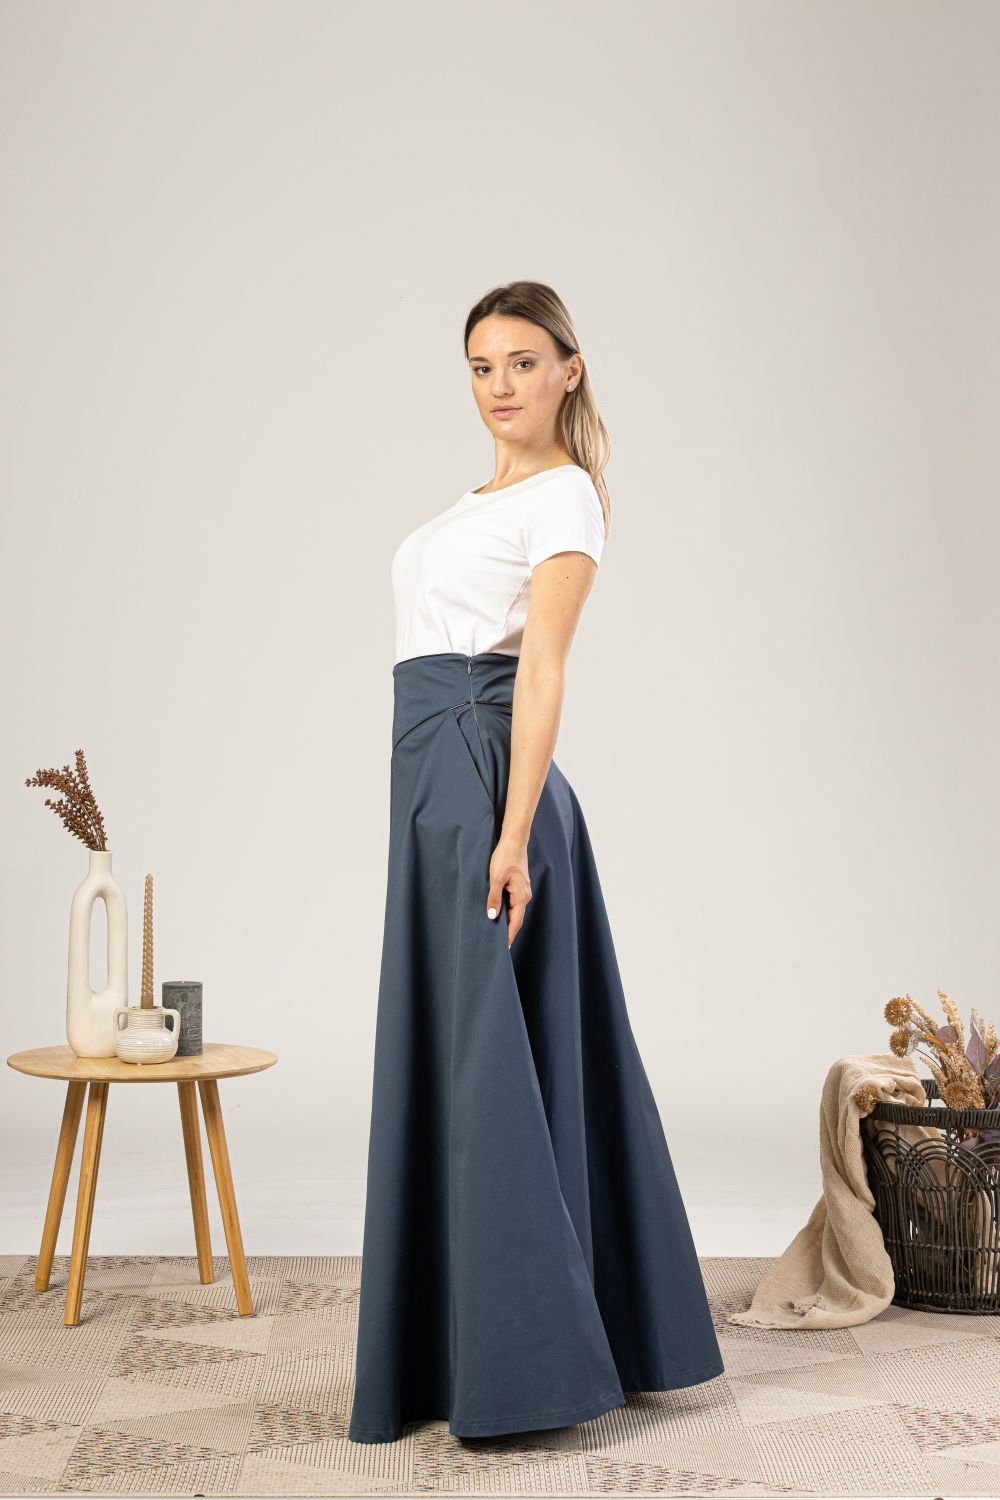 Slate Blue High Waist Victorian Skirt from the side view - from NikkaPlace | Effortless fashion for easy living